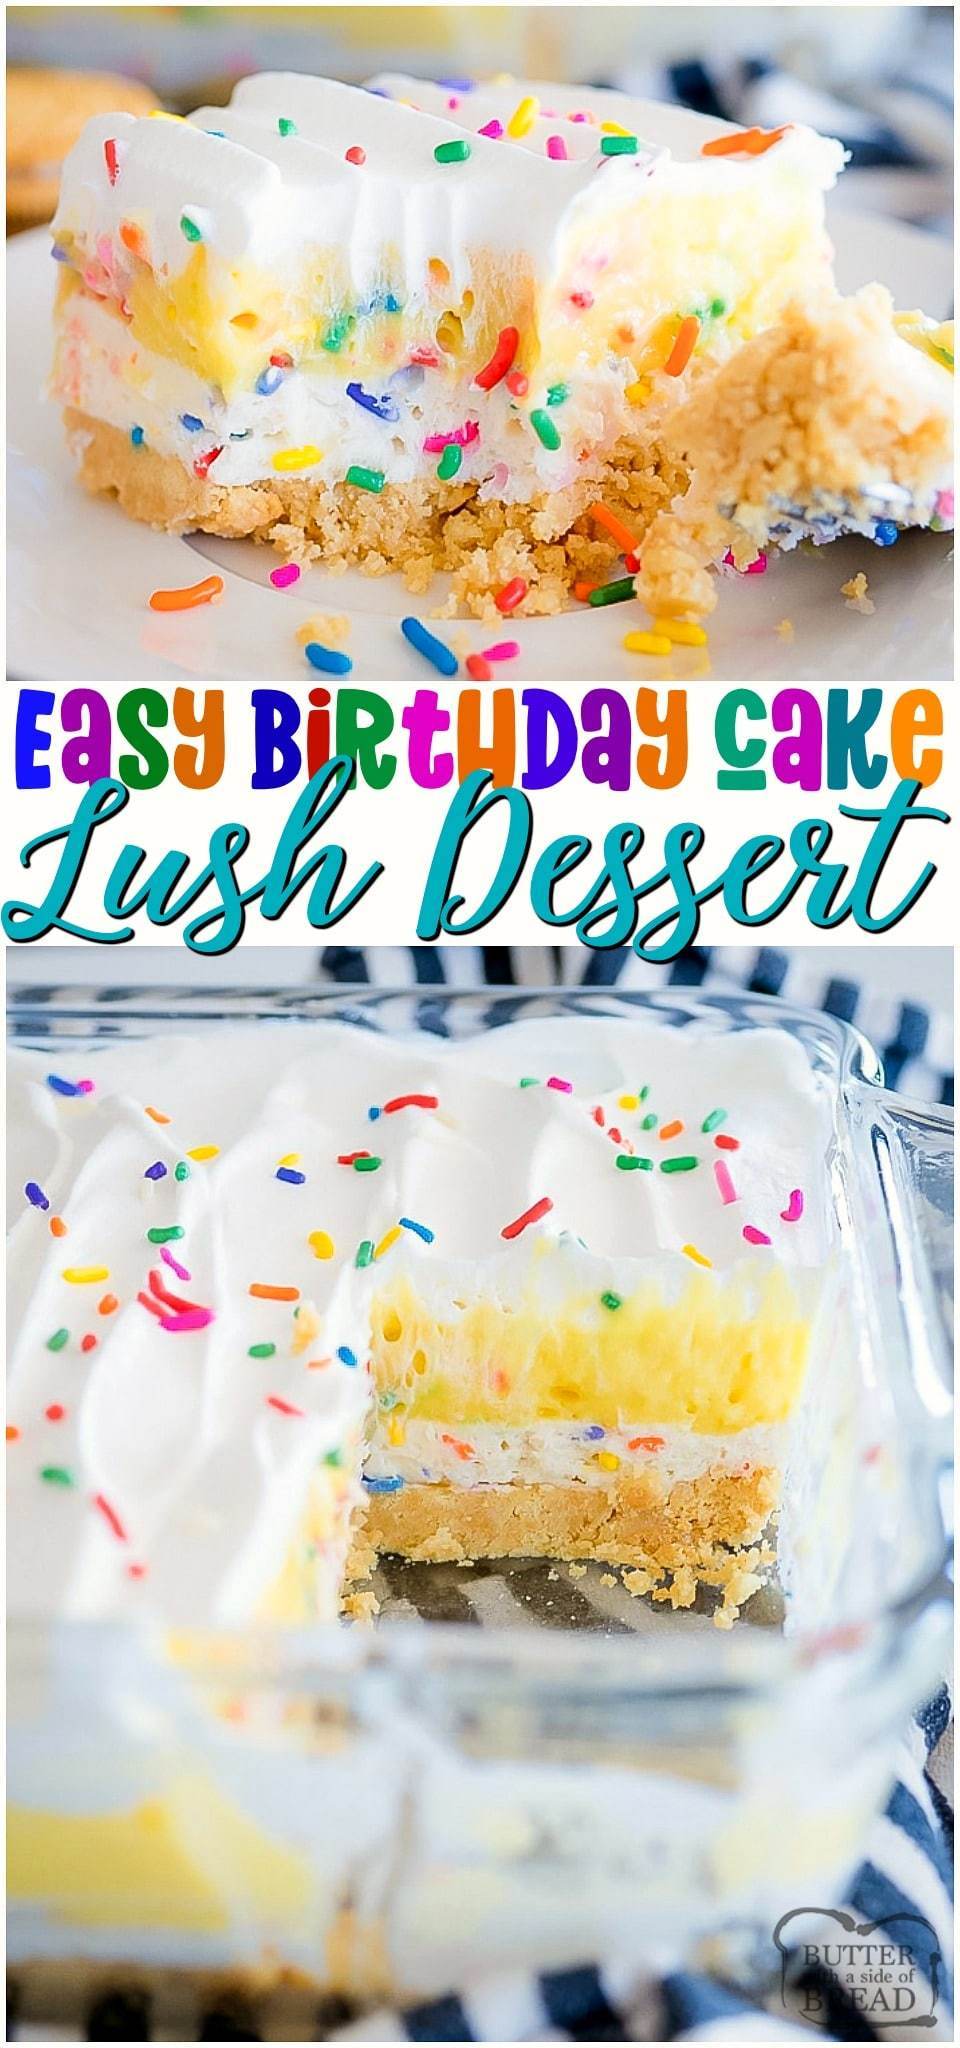 Birthday Cake Lush is a no bake dessert made with crushed Oreos, pudding, sweet cream and cake mix! Full of that cake batter flavor, this sweet, creamy layered dessert is perfect for any celebration!